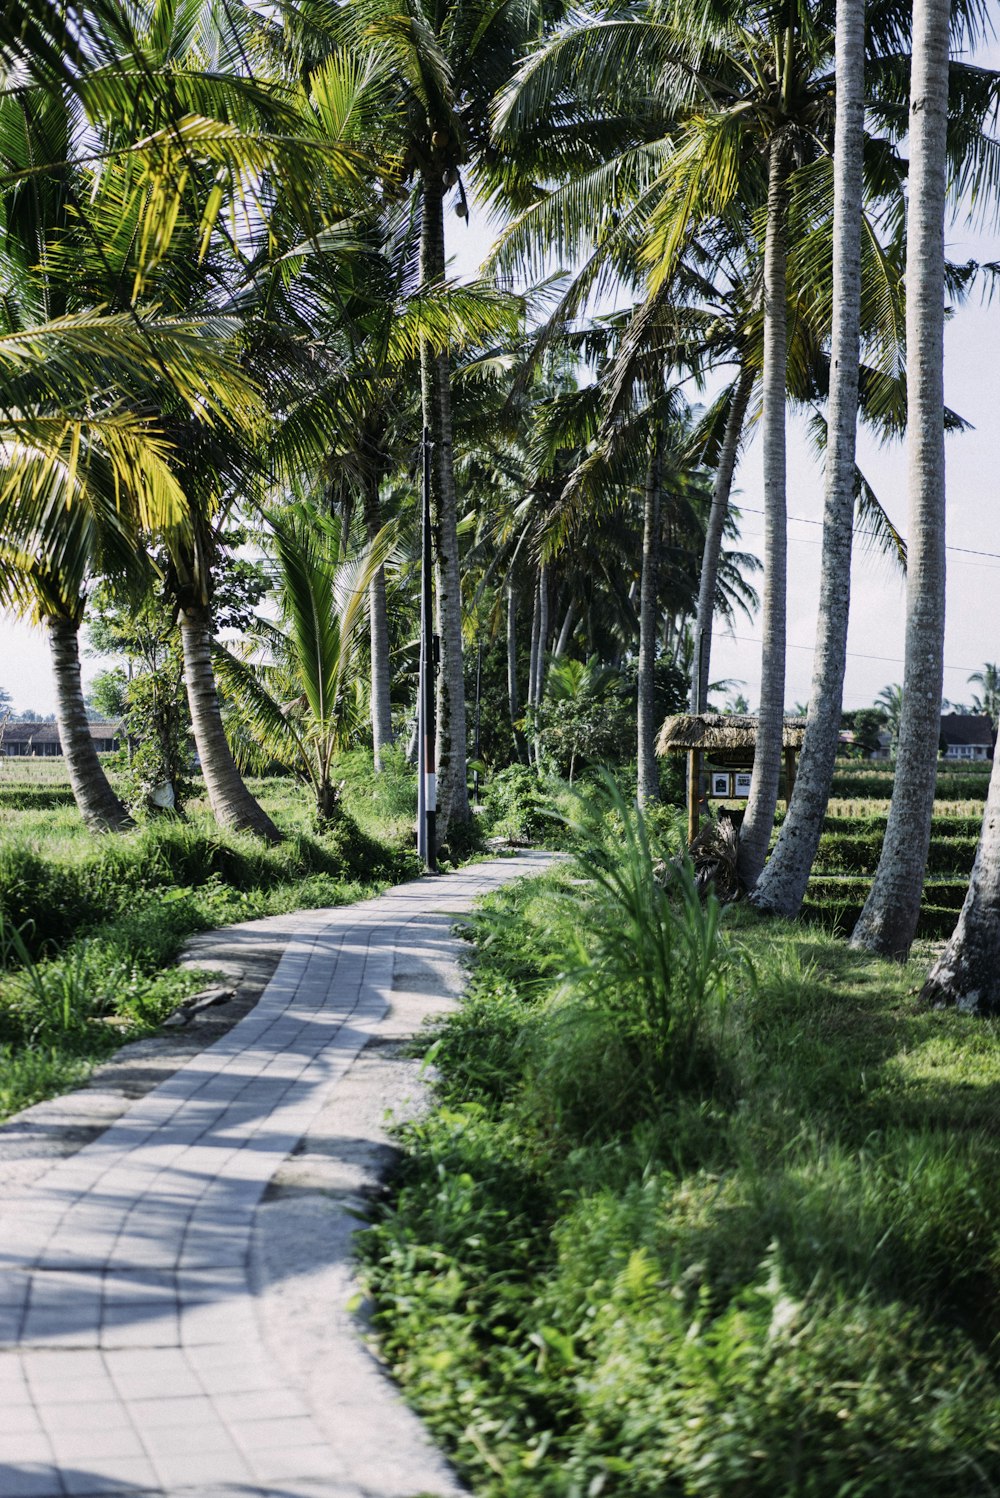 gray concrete road between green palm trees during daytime